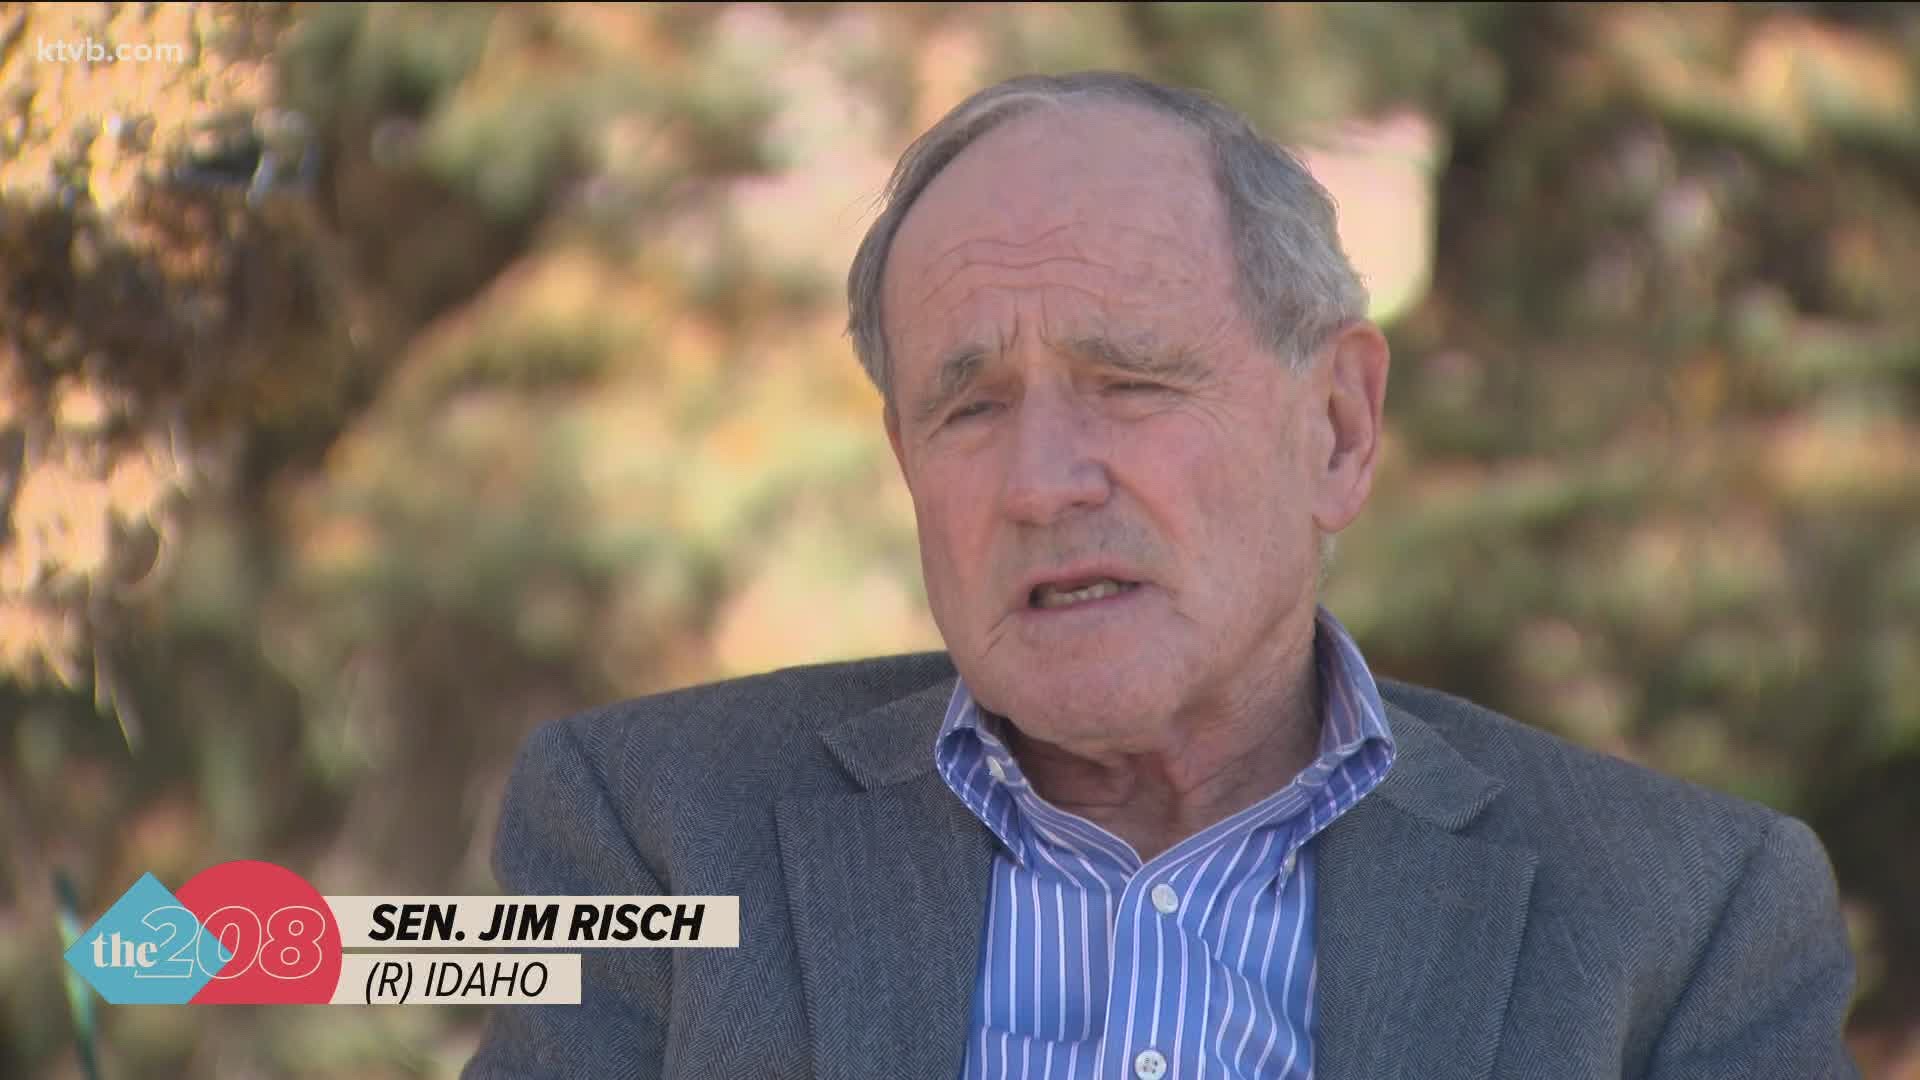 In an interview with KTVB, Risch said he believes that the country will be back to normal before next fall.